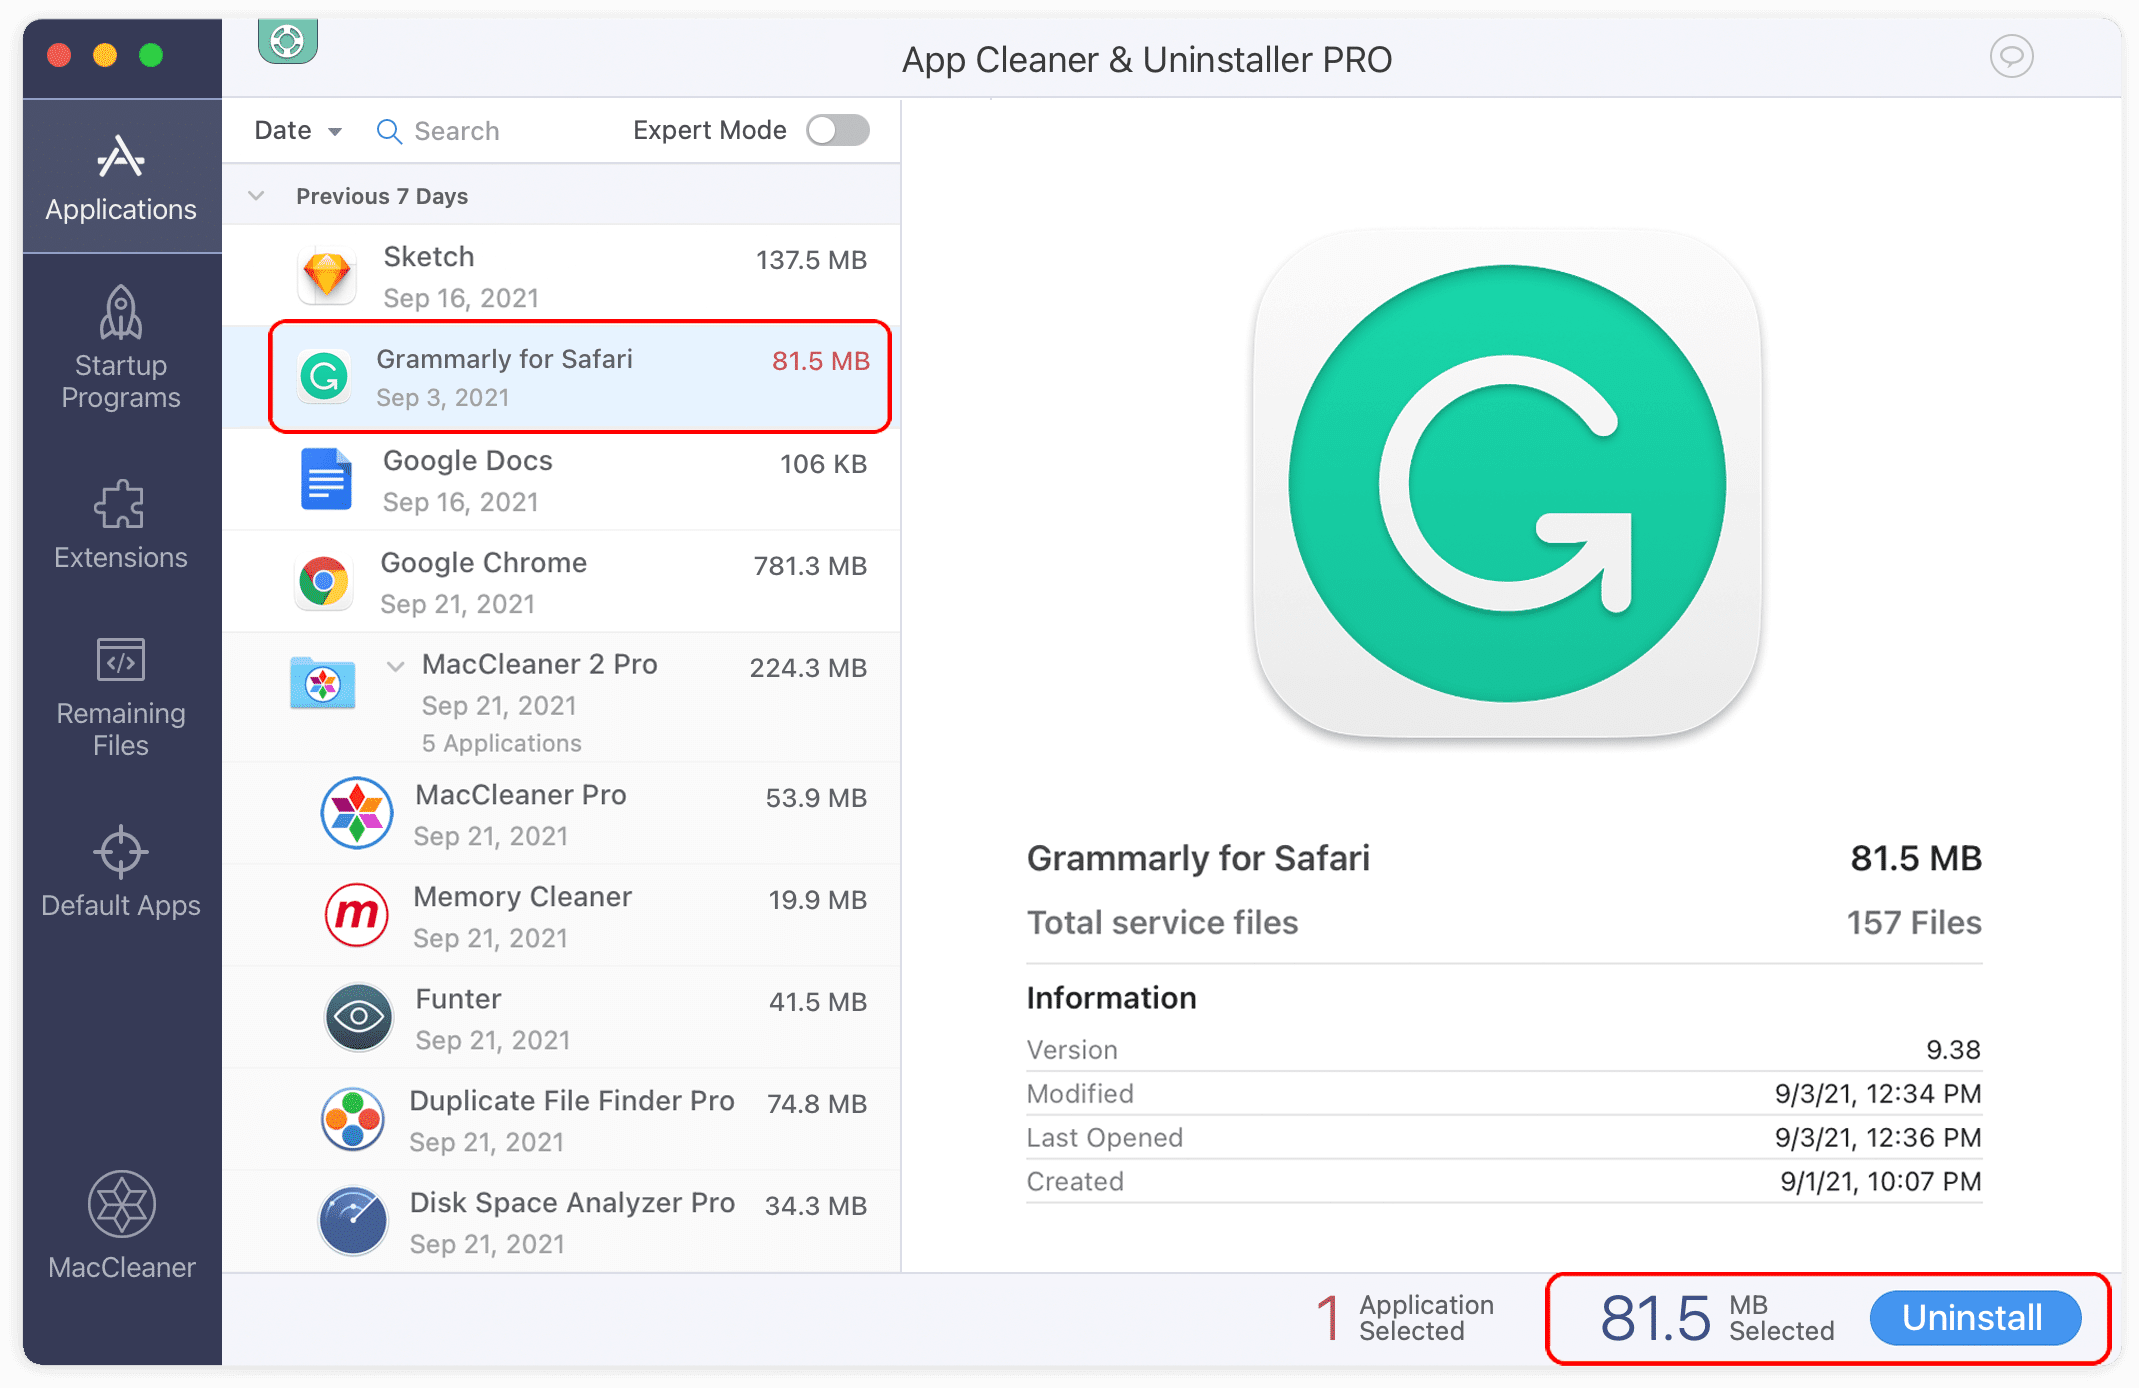 removing Grammarly for Safari with App Cleaner & Uninstaller